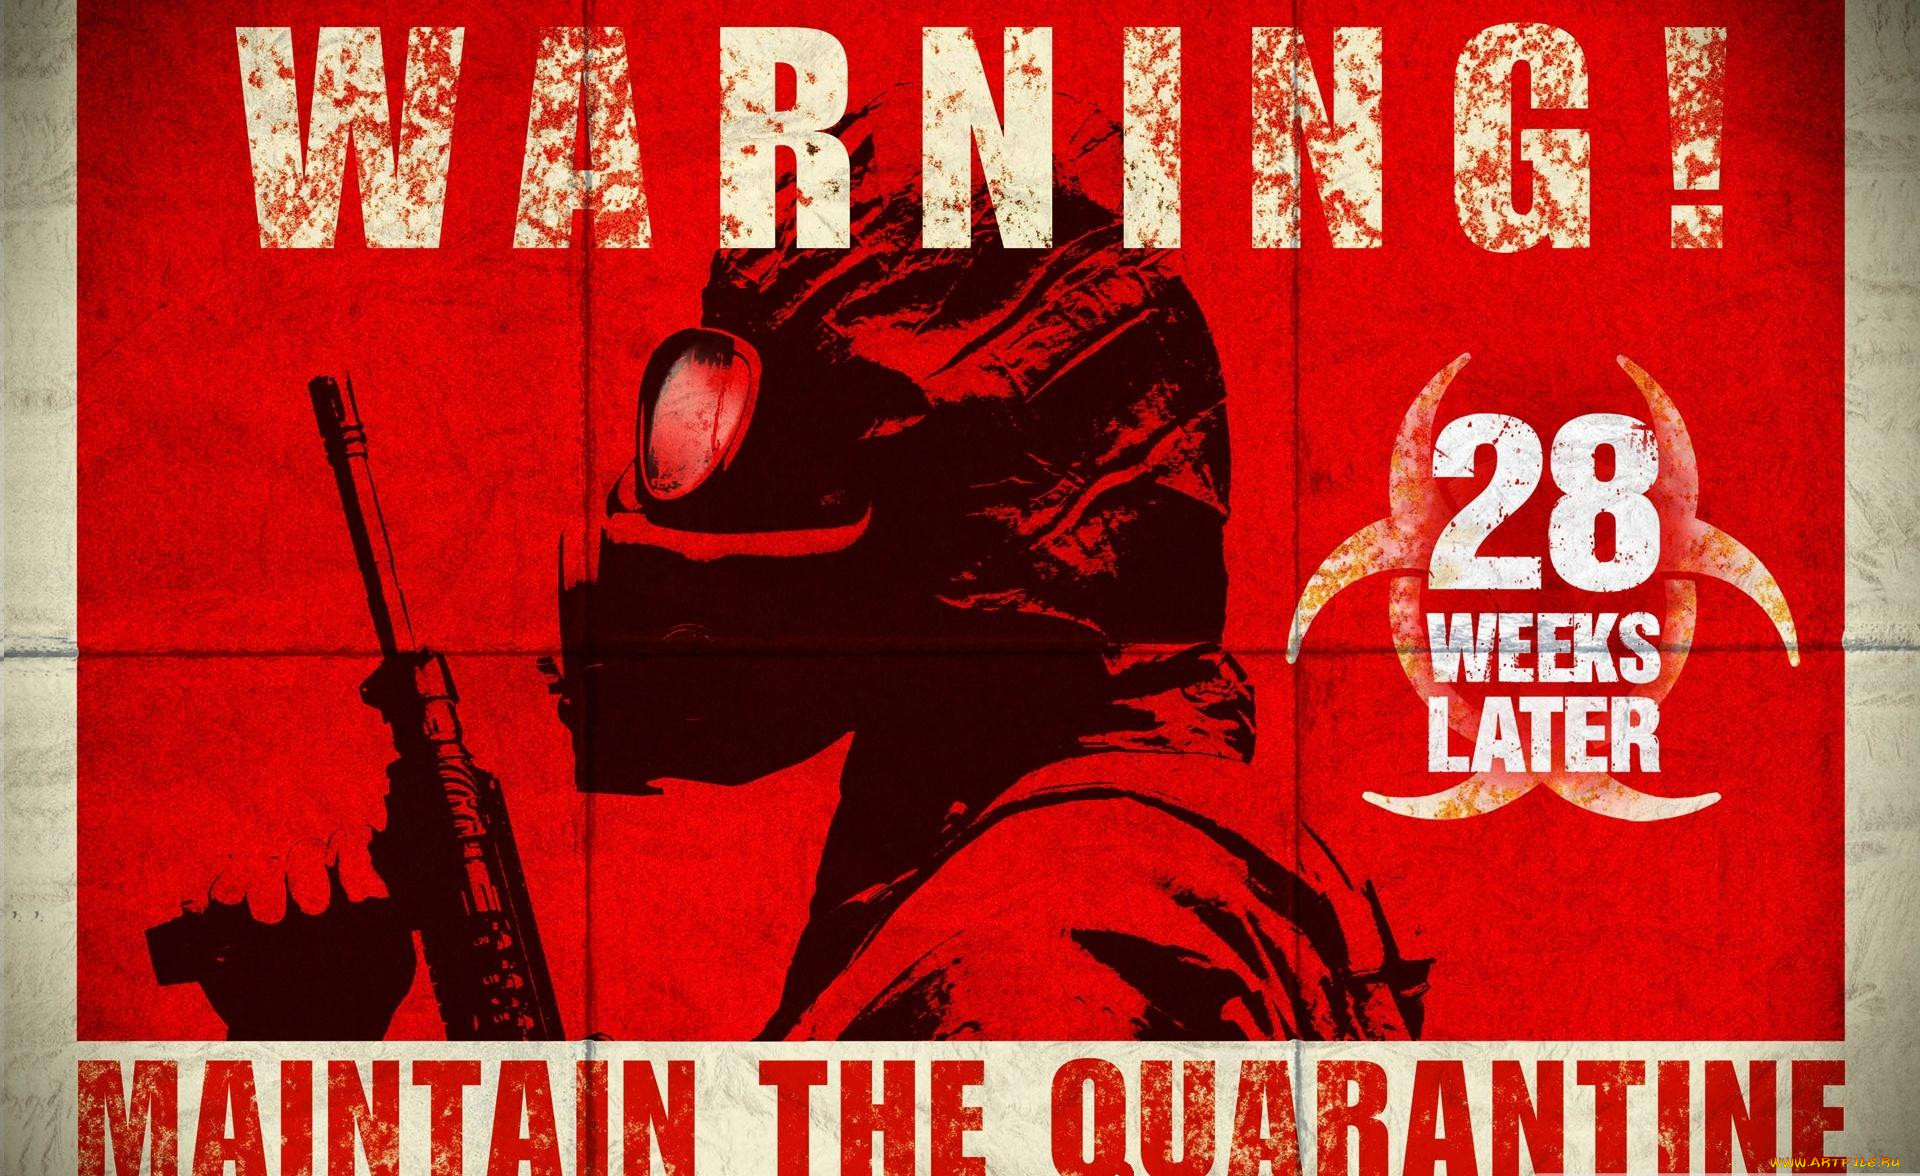  , 28 weeks later, , 